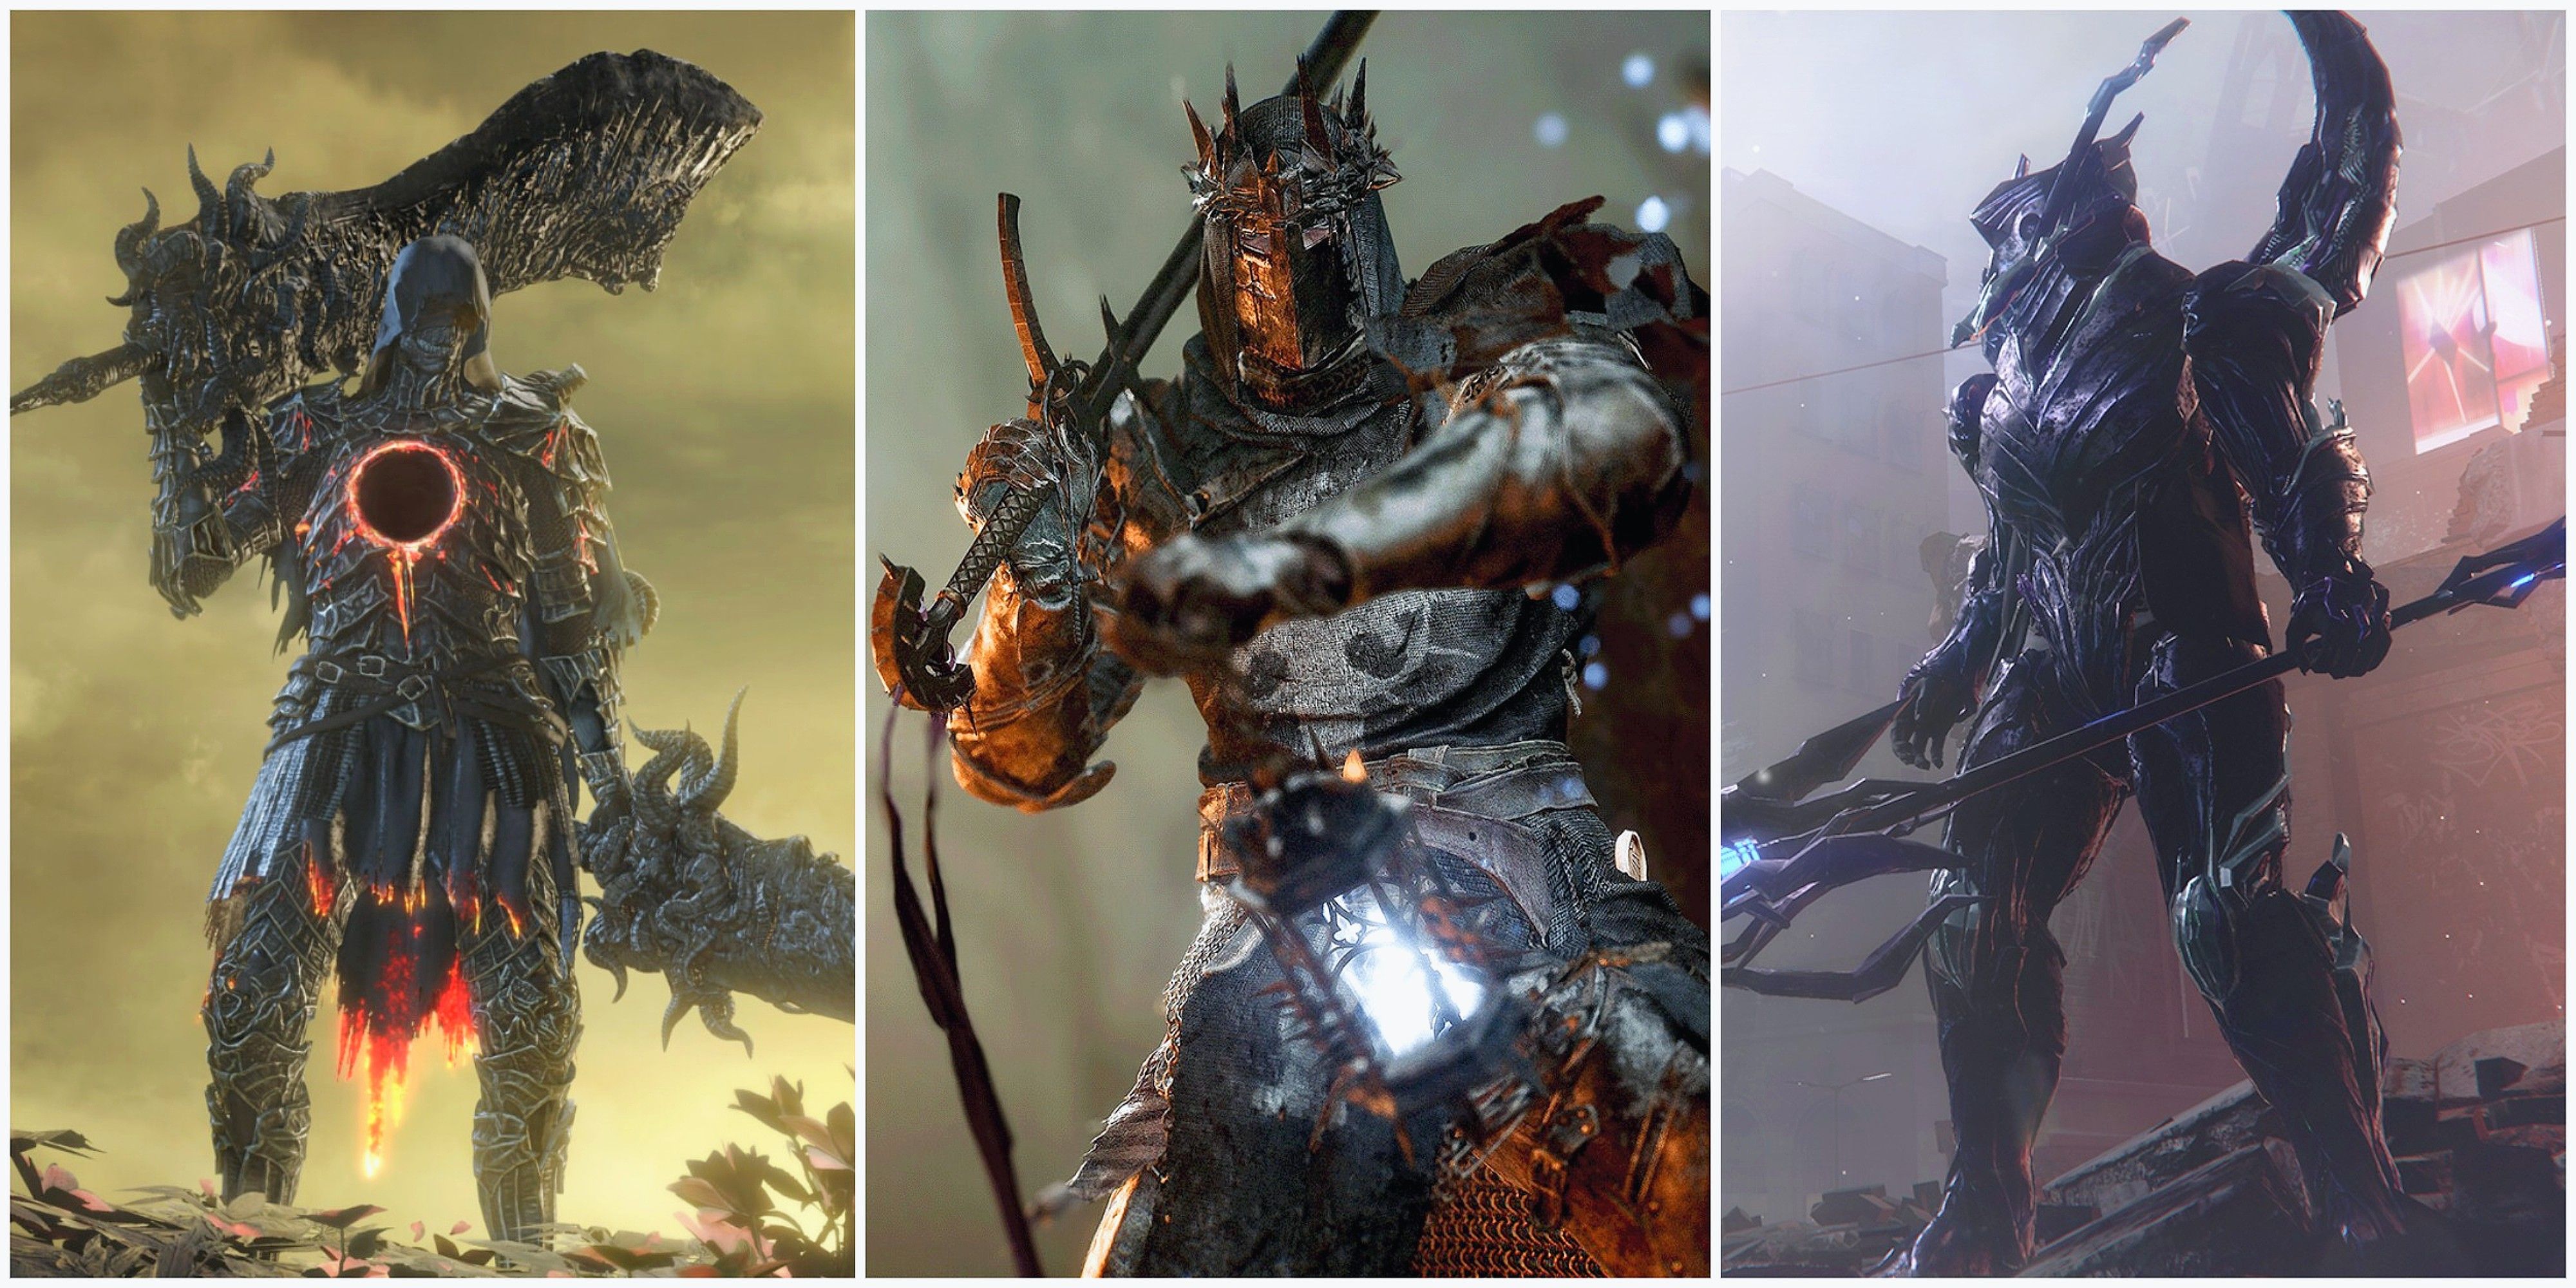 Best Soulslikes With The Most Weapons Include Dark Souls 3, The Surge 2, and Lords of the Fallen